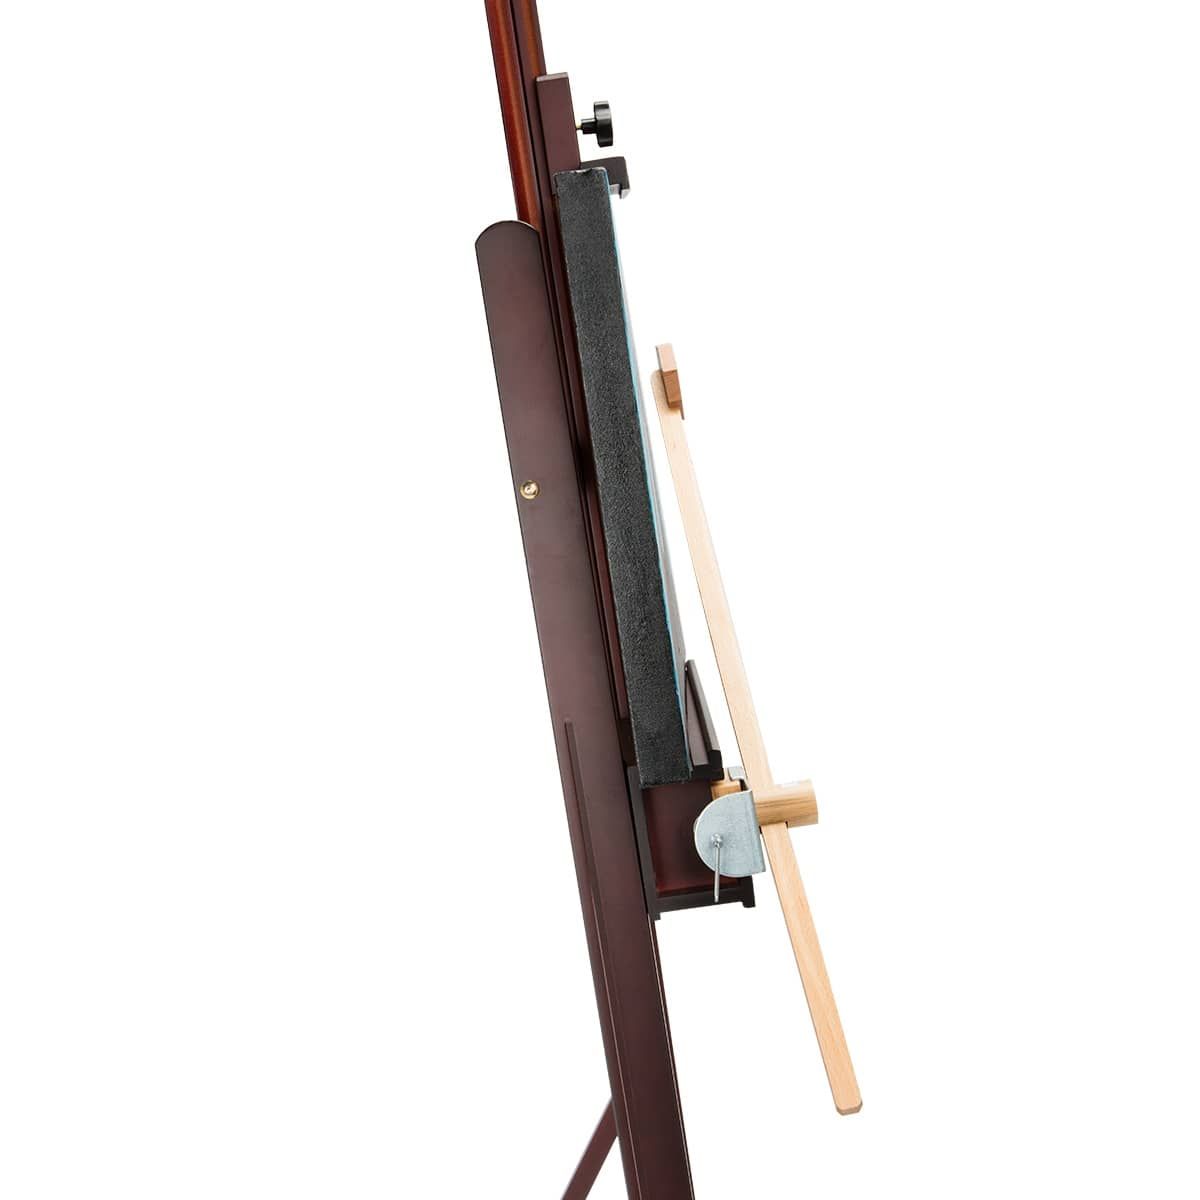 Clamp it virtually anywhere on your easel